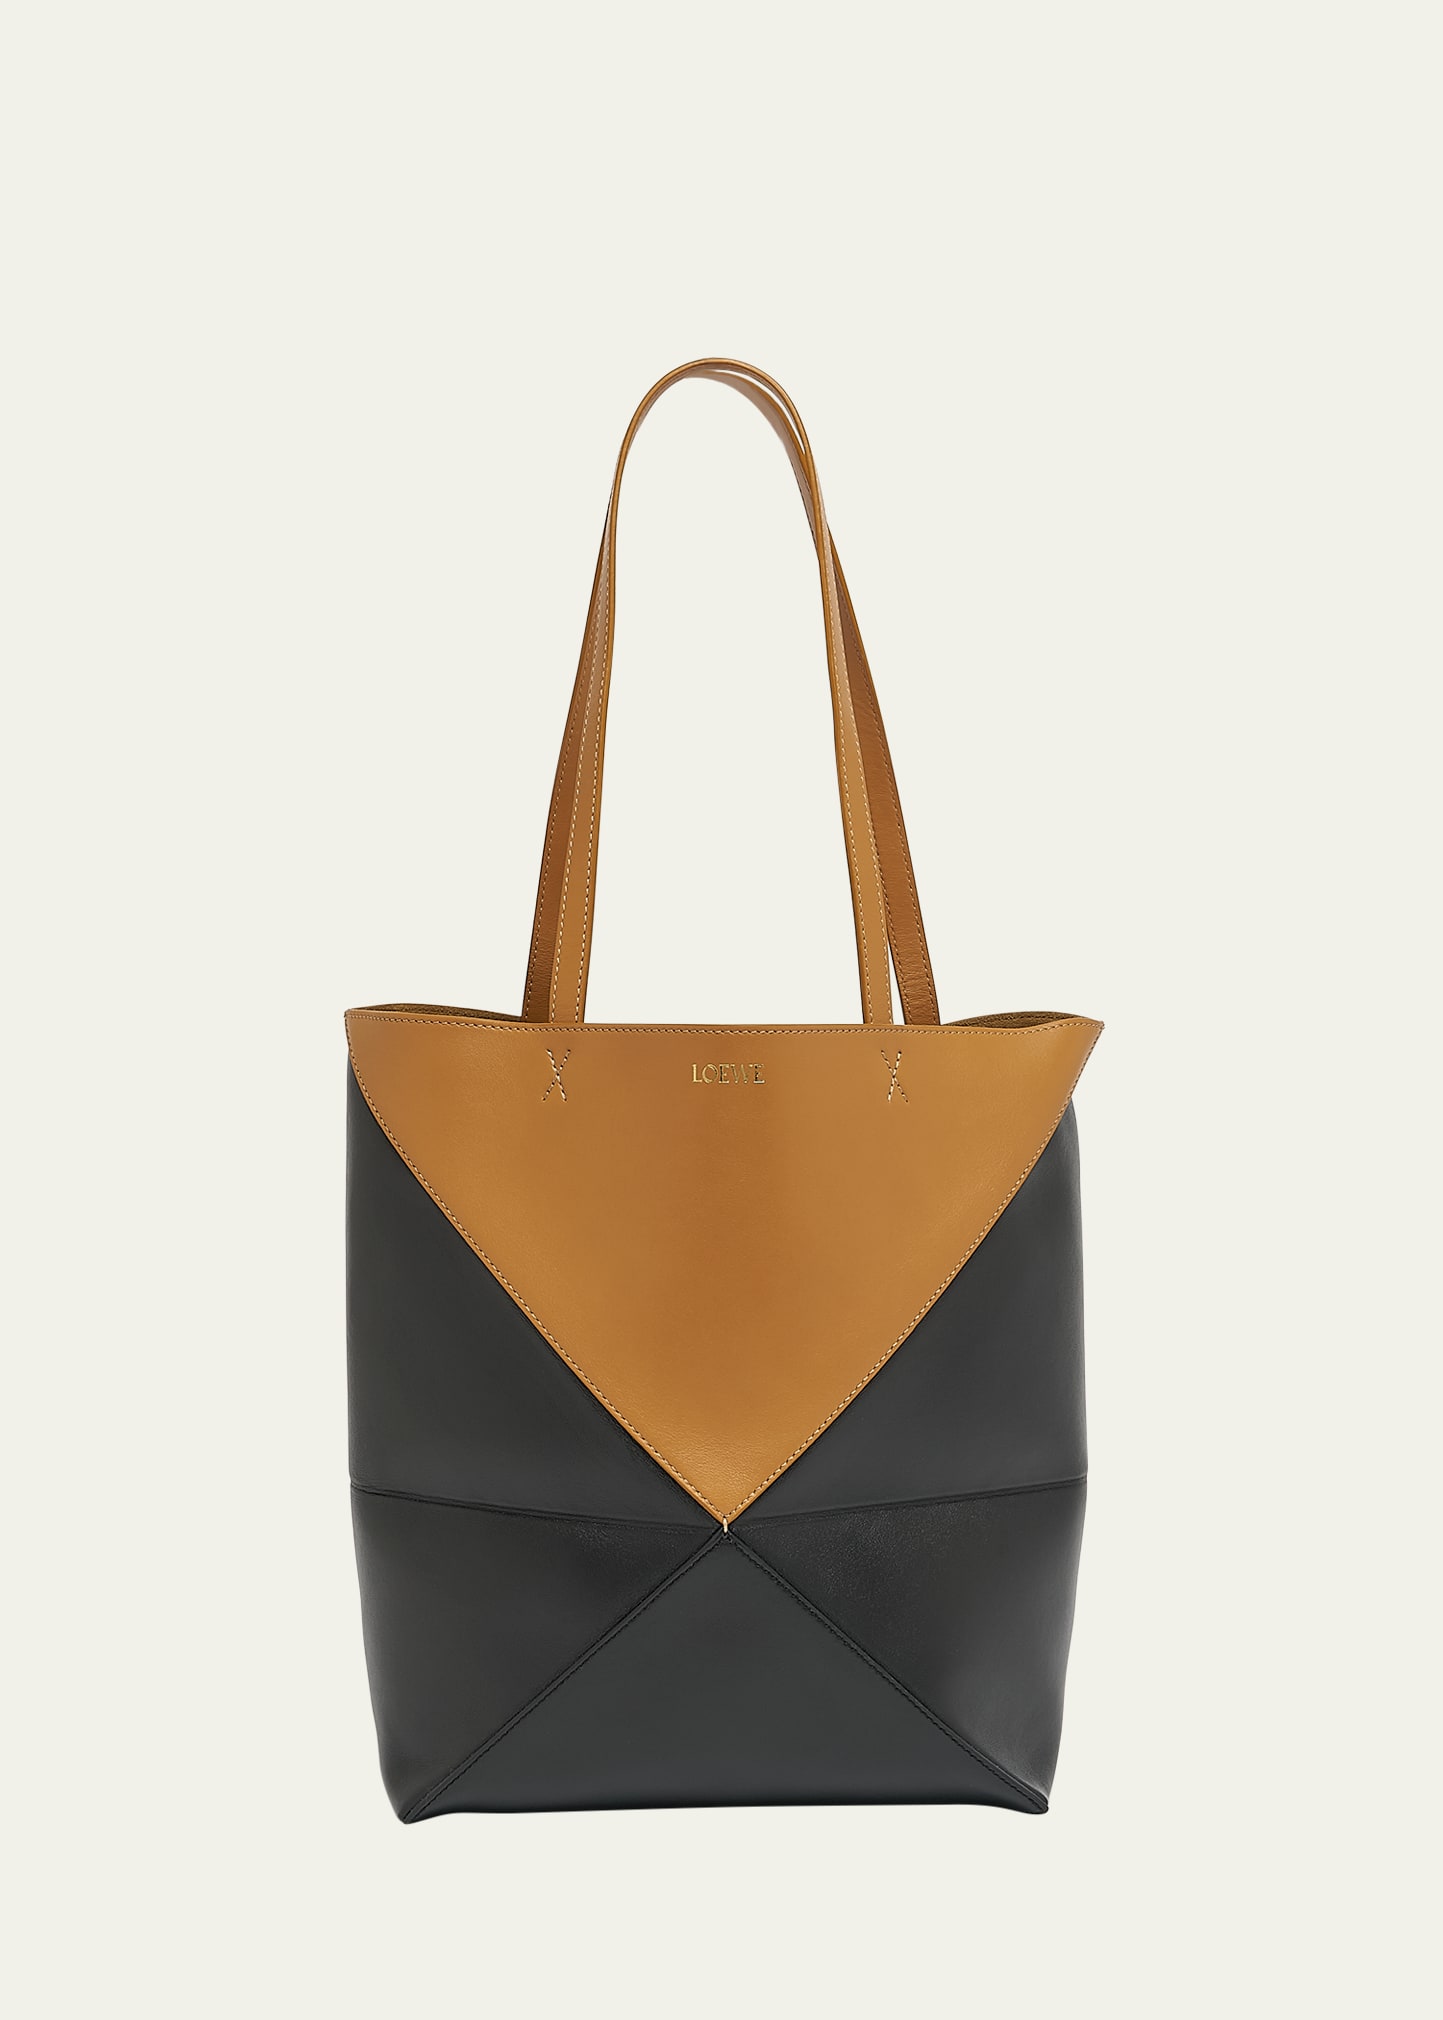 Puzzle Fold Medium Tote Bag in Shiny Bicolor Leather